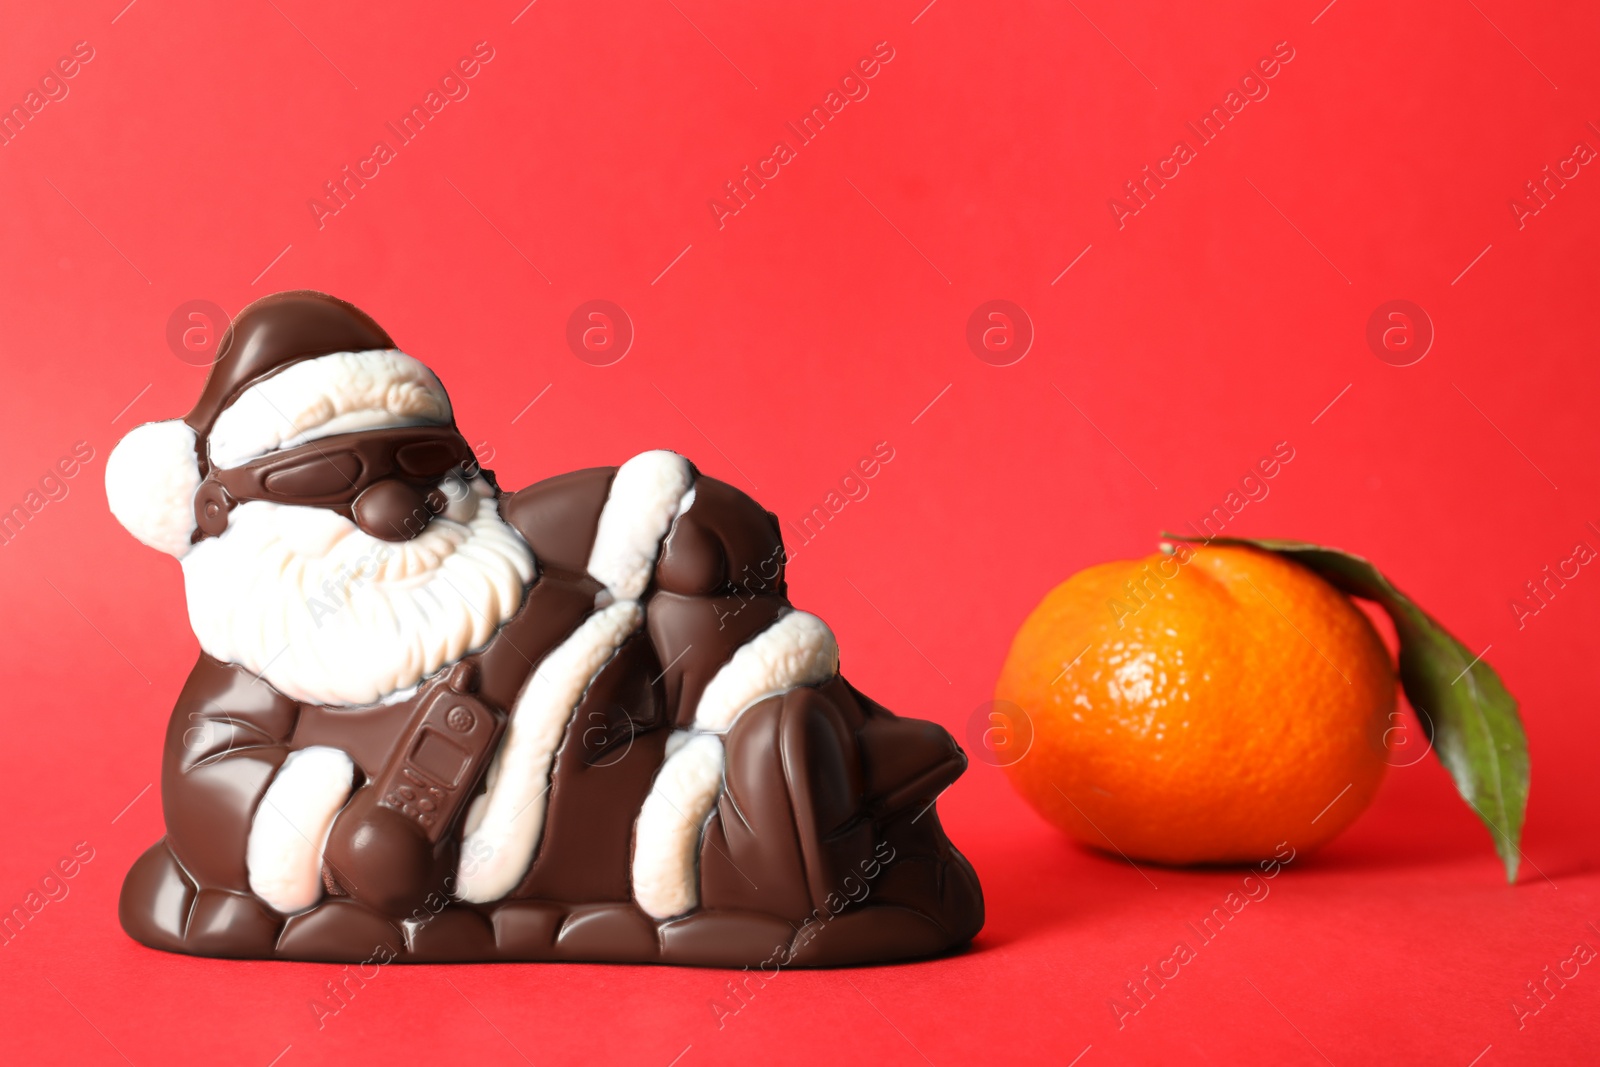 Photo of Chocolate Santa Claus and tangerine on red background